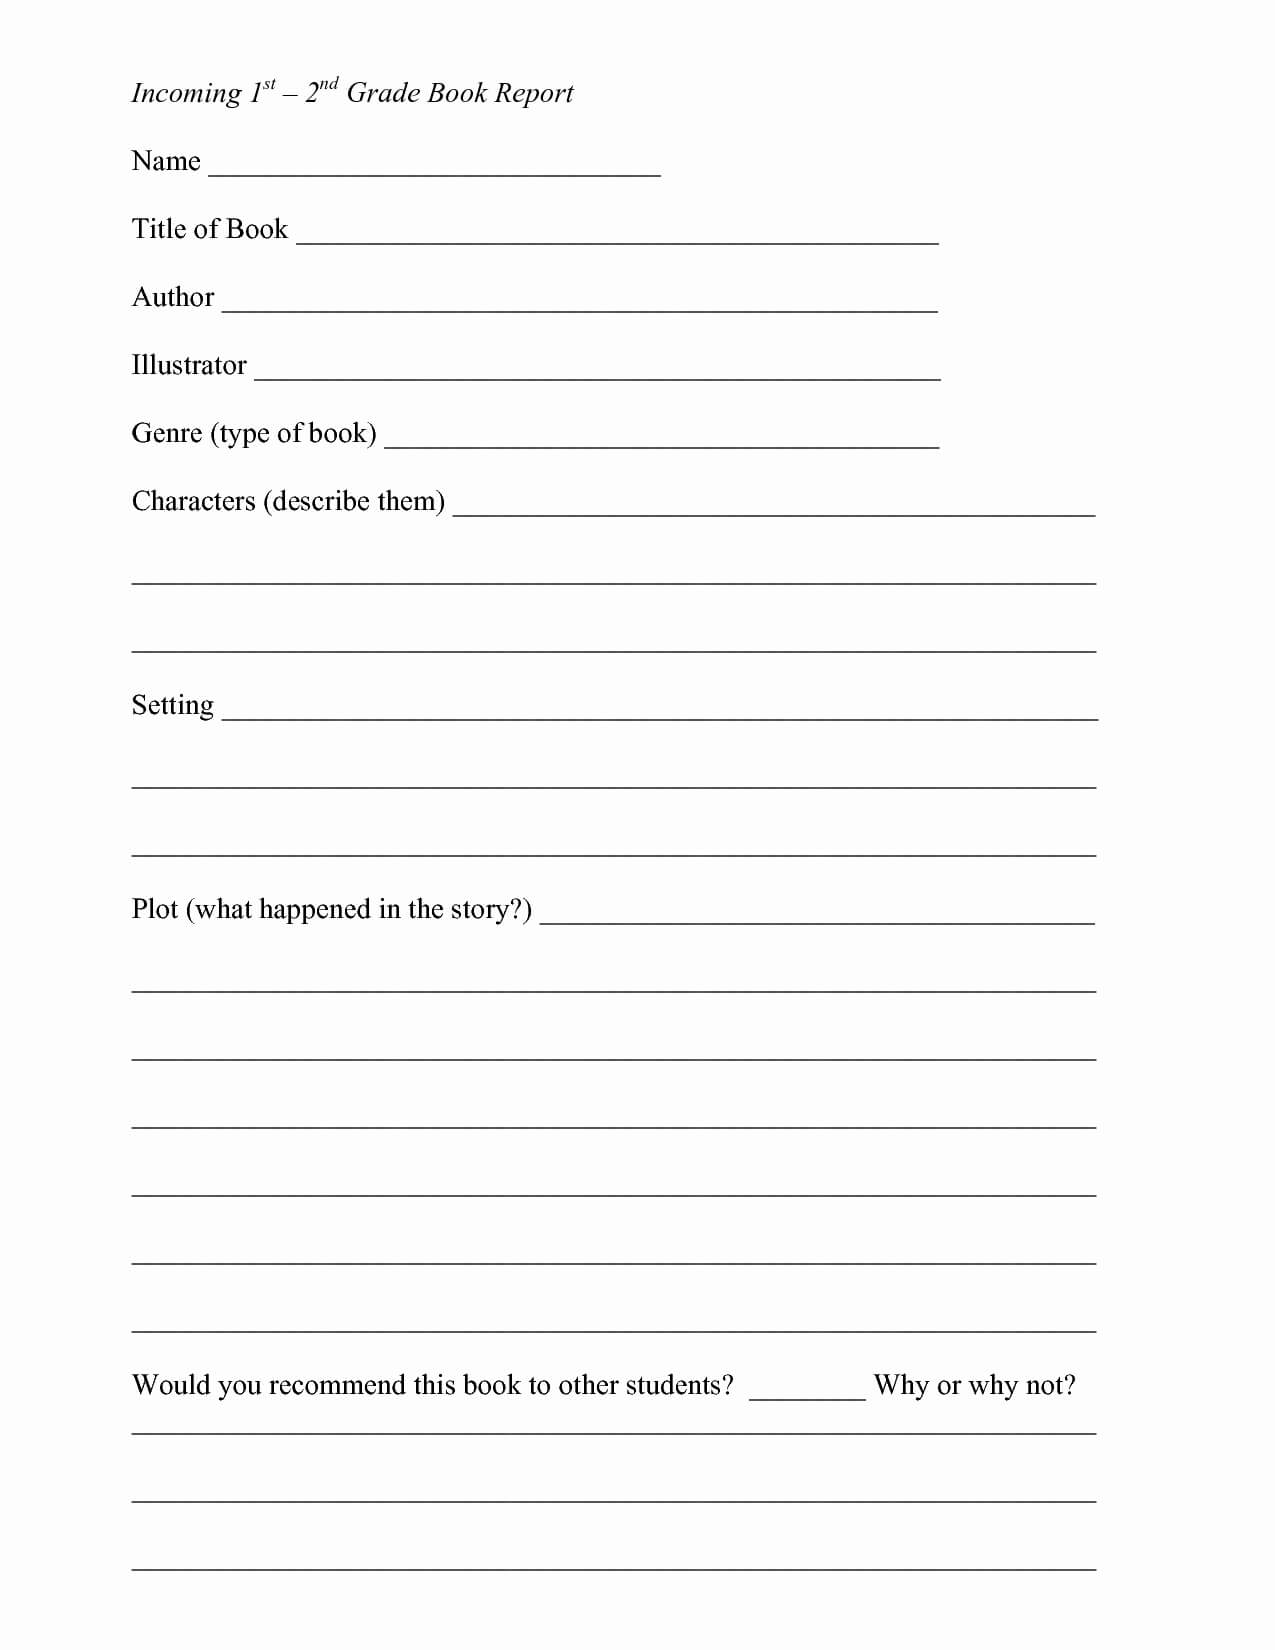 Fiction Book Report Template 6Th Grade For 7Th Graders Pdf Intended For 2Nd Grade Book Report Template